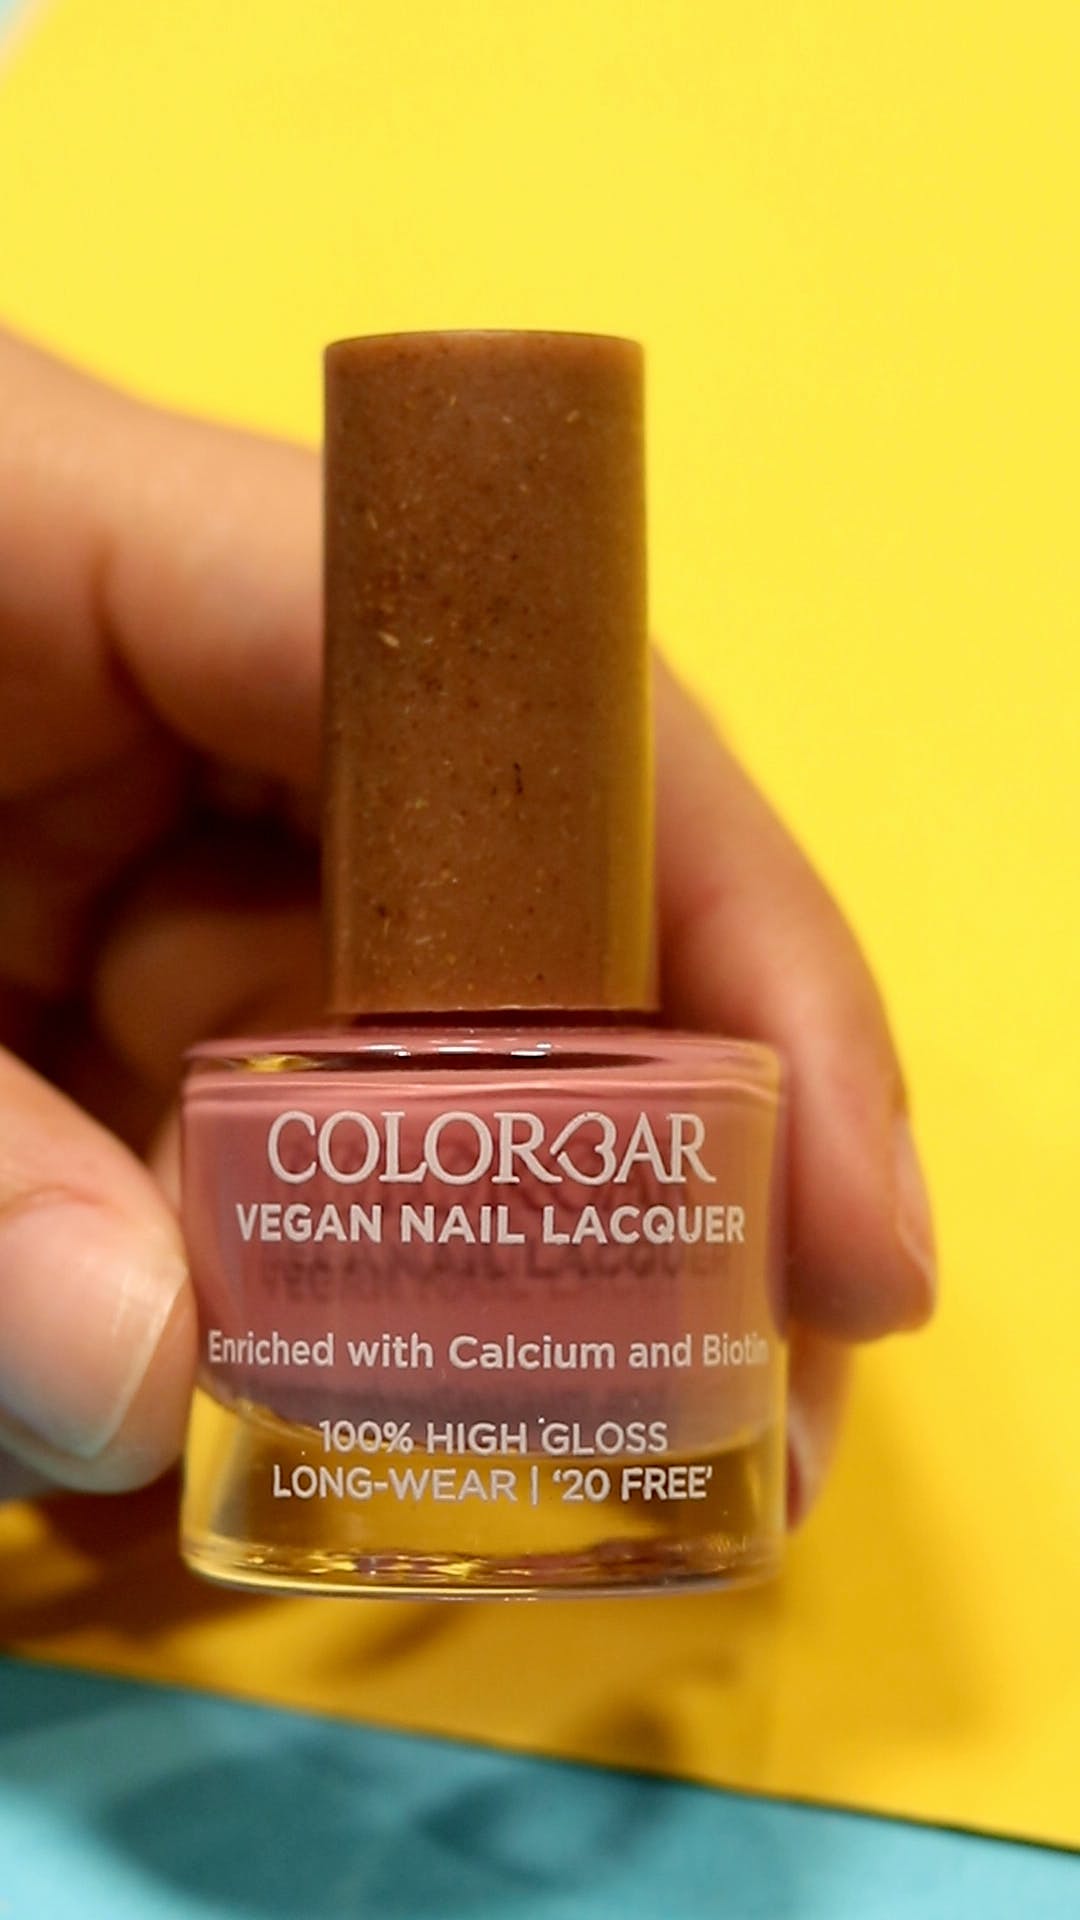 colorbar nail lacquer | Beauty Scribblings